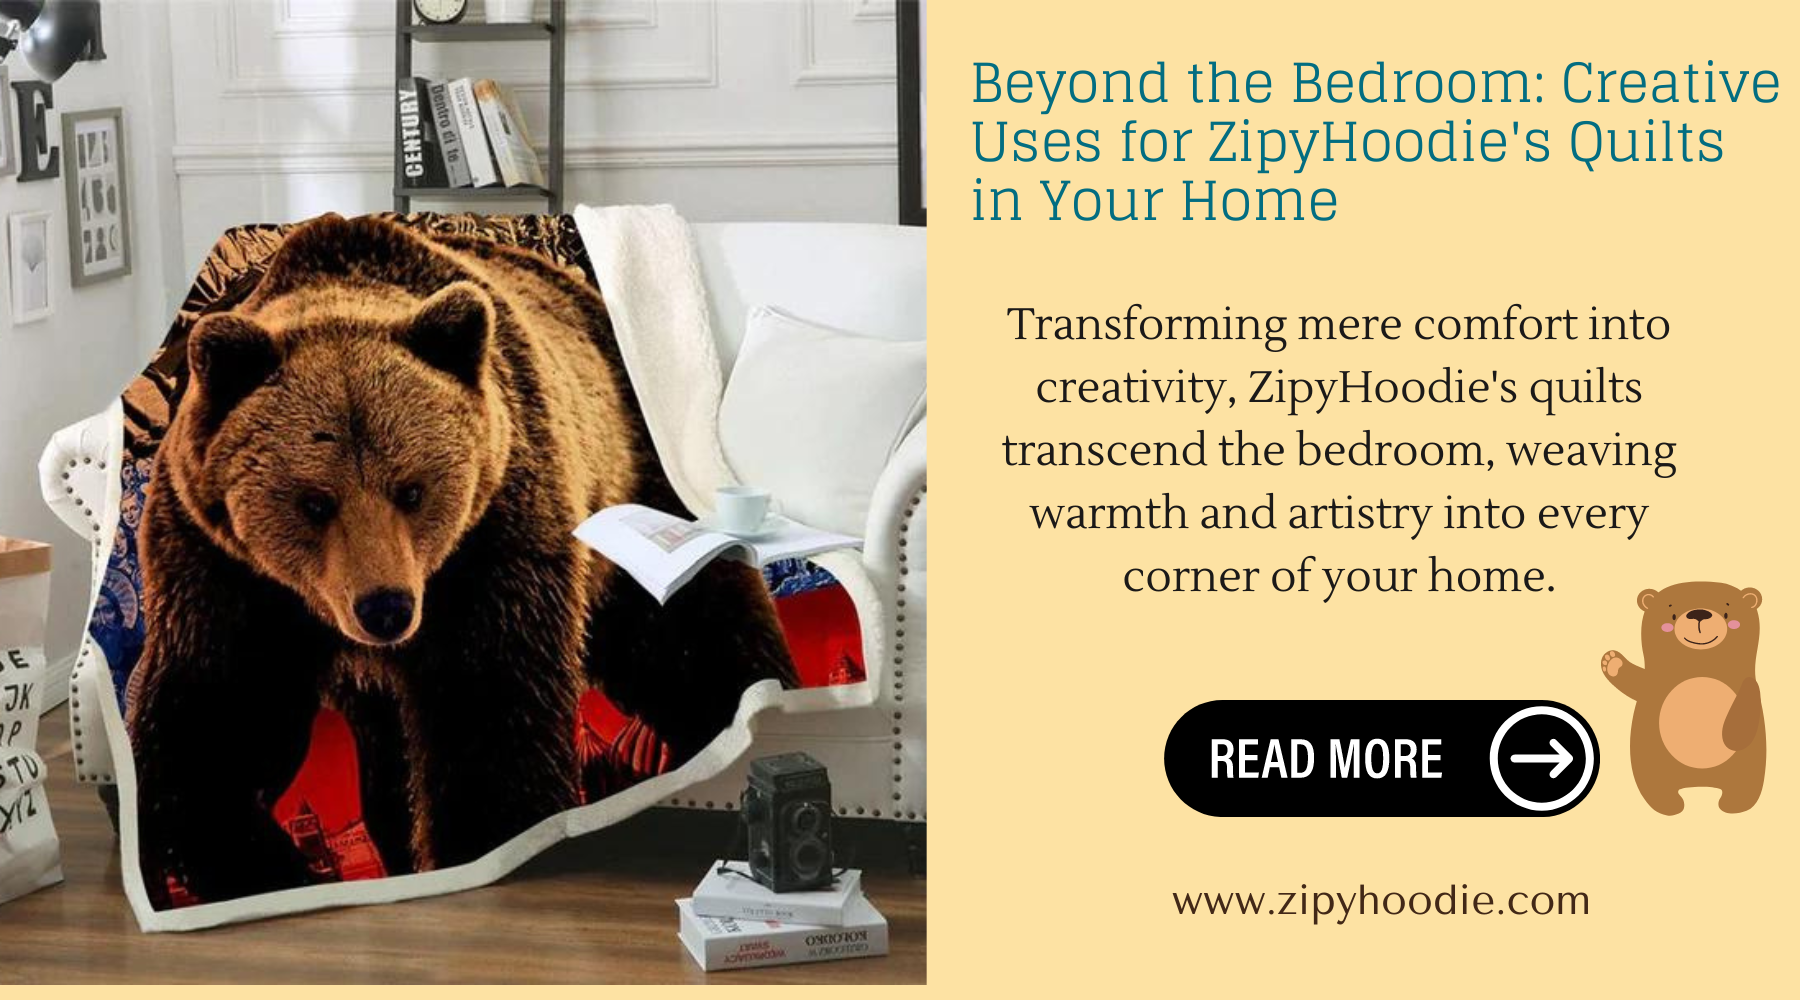 Beyond The Bedroom: Creative Uses For ZipyHoodie's Quilts In Your Home